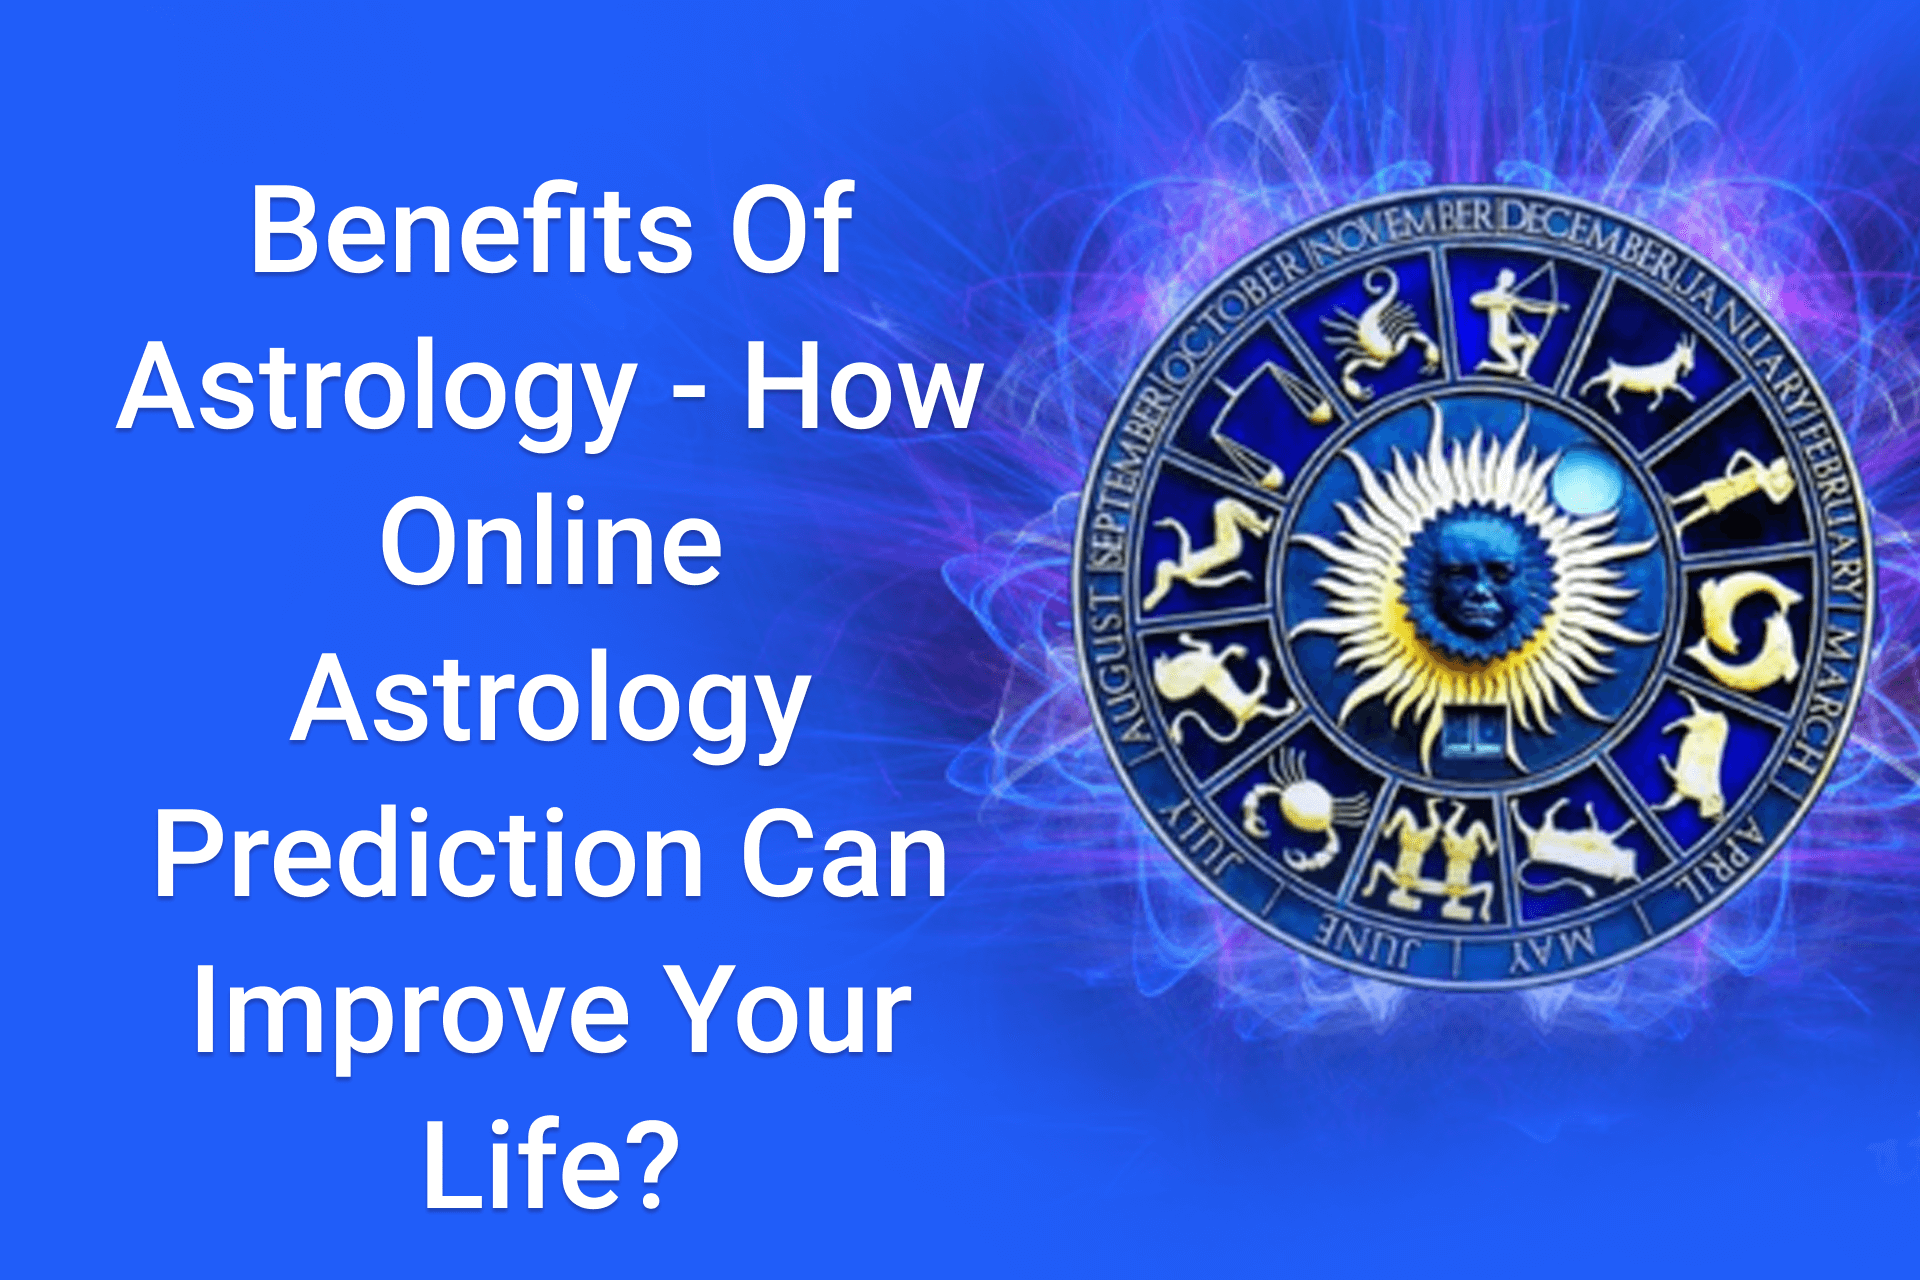 Benefits Of Astrology – How Online Astrology Prediction Can Improve Your Life?